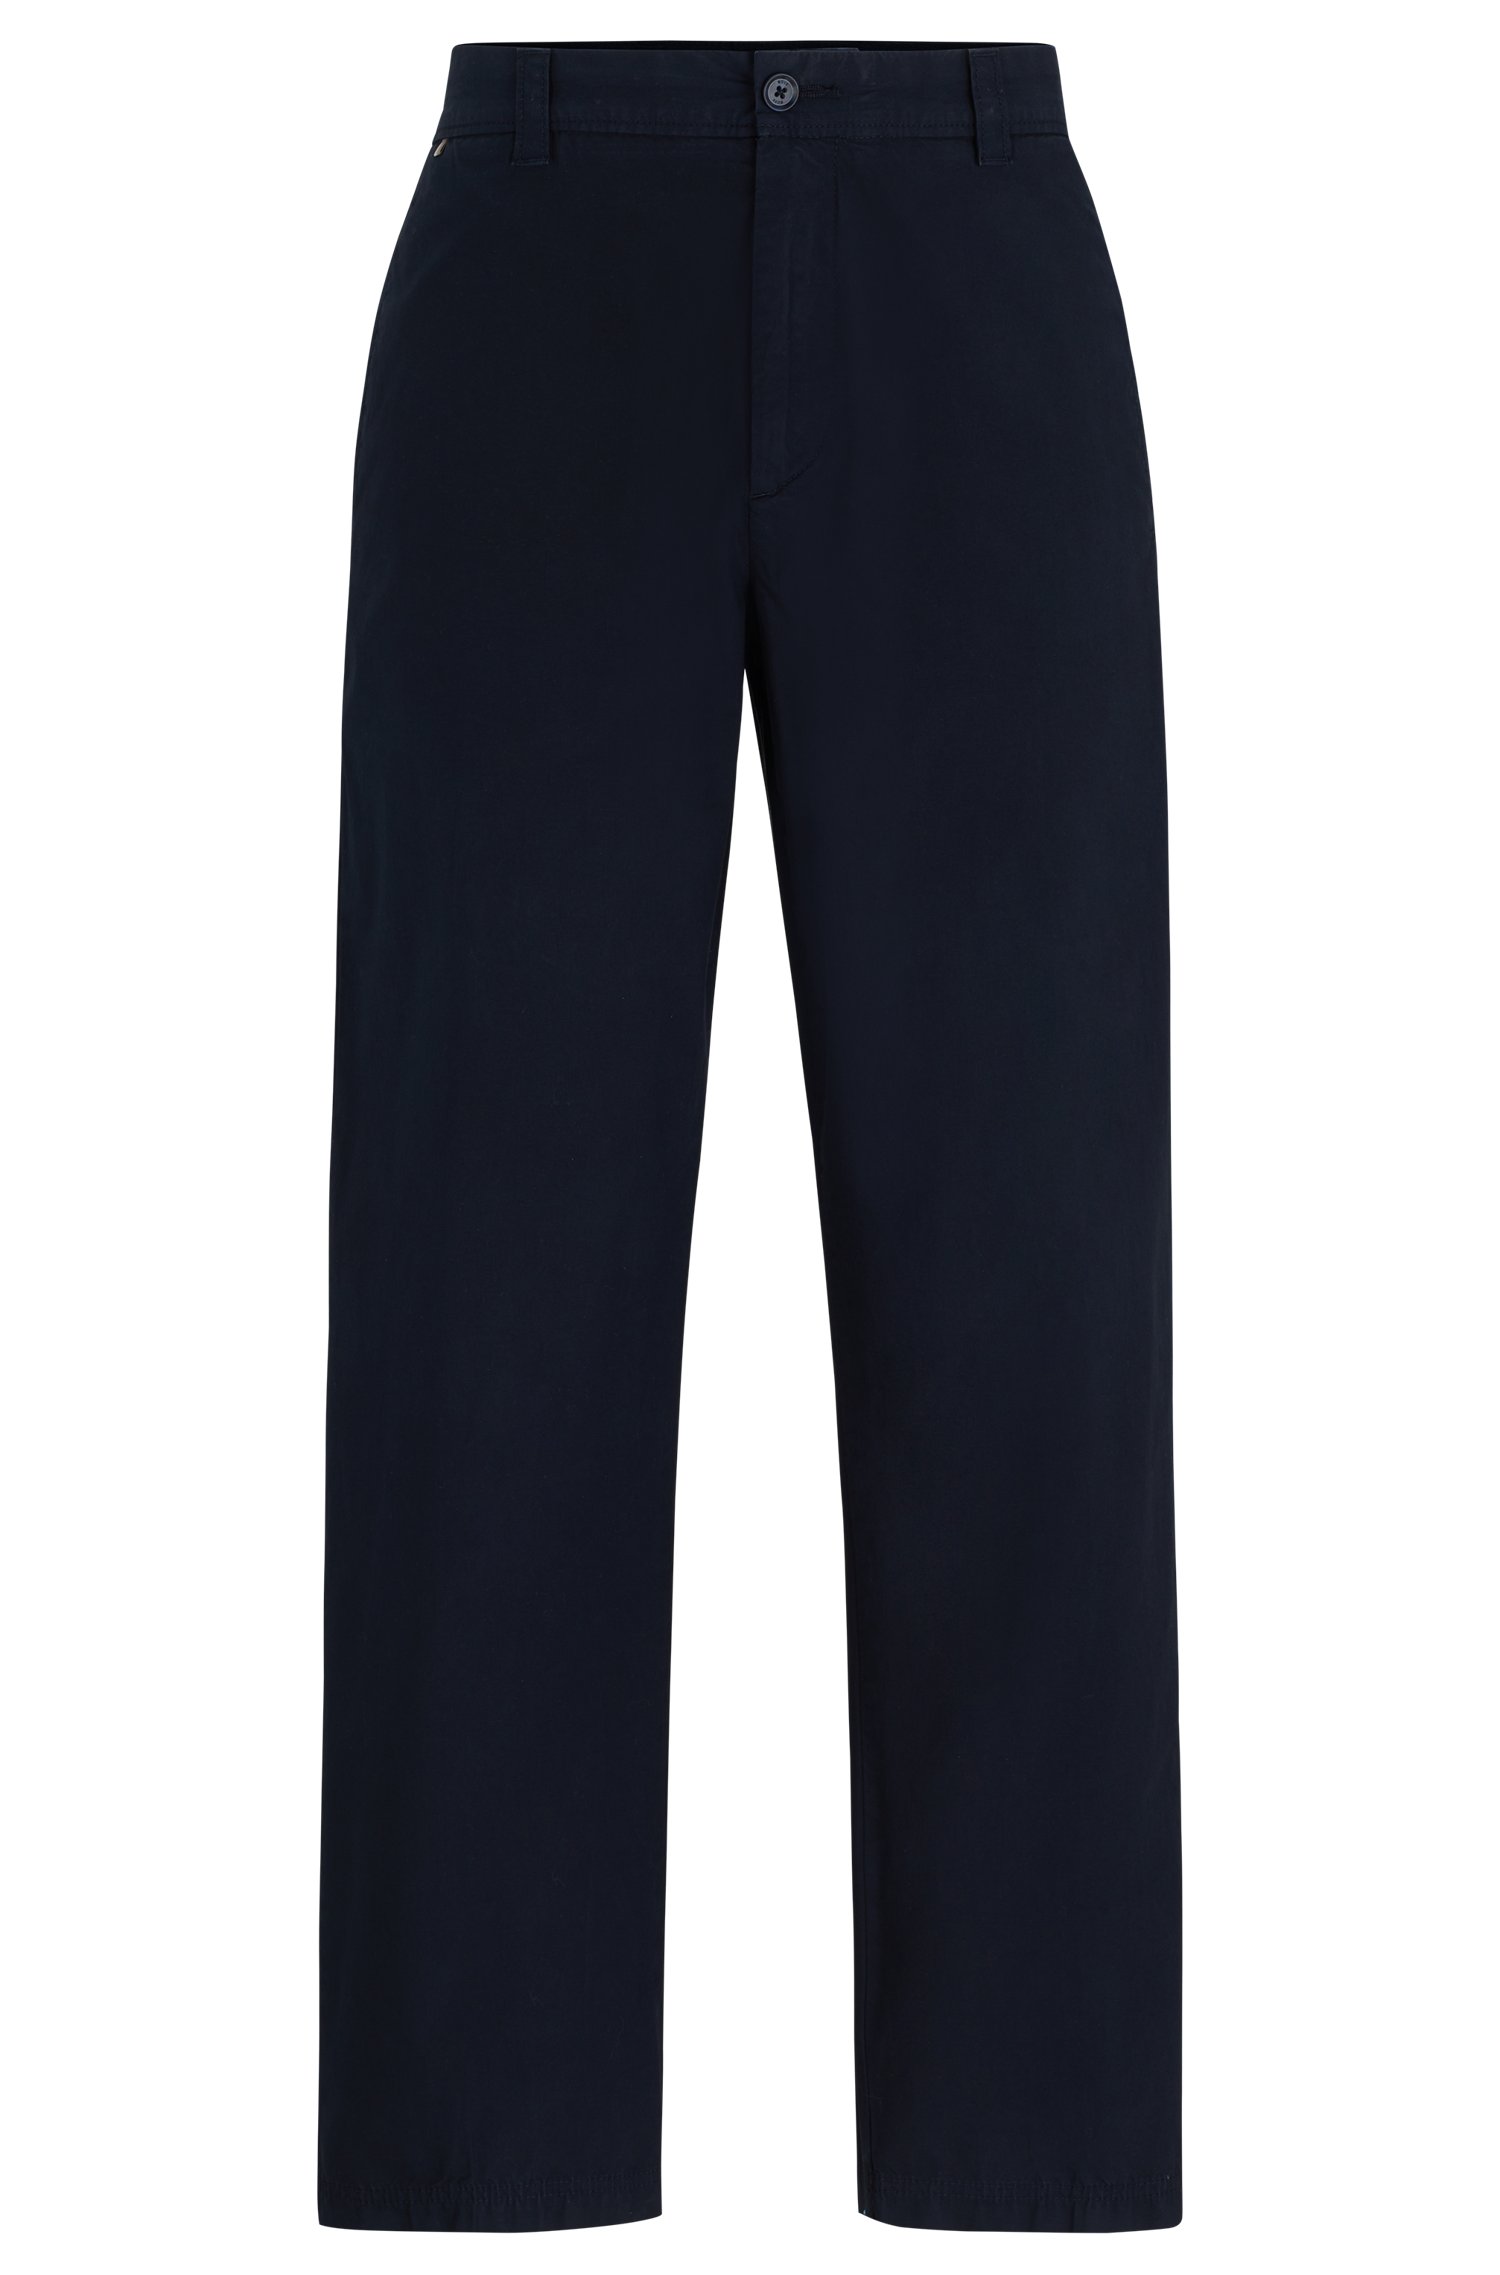 Relaxed-fit trousers stretch-cotton poplin